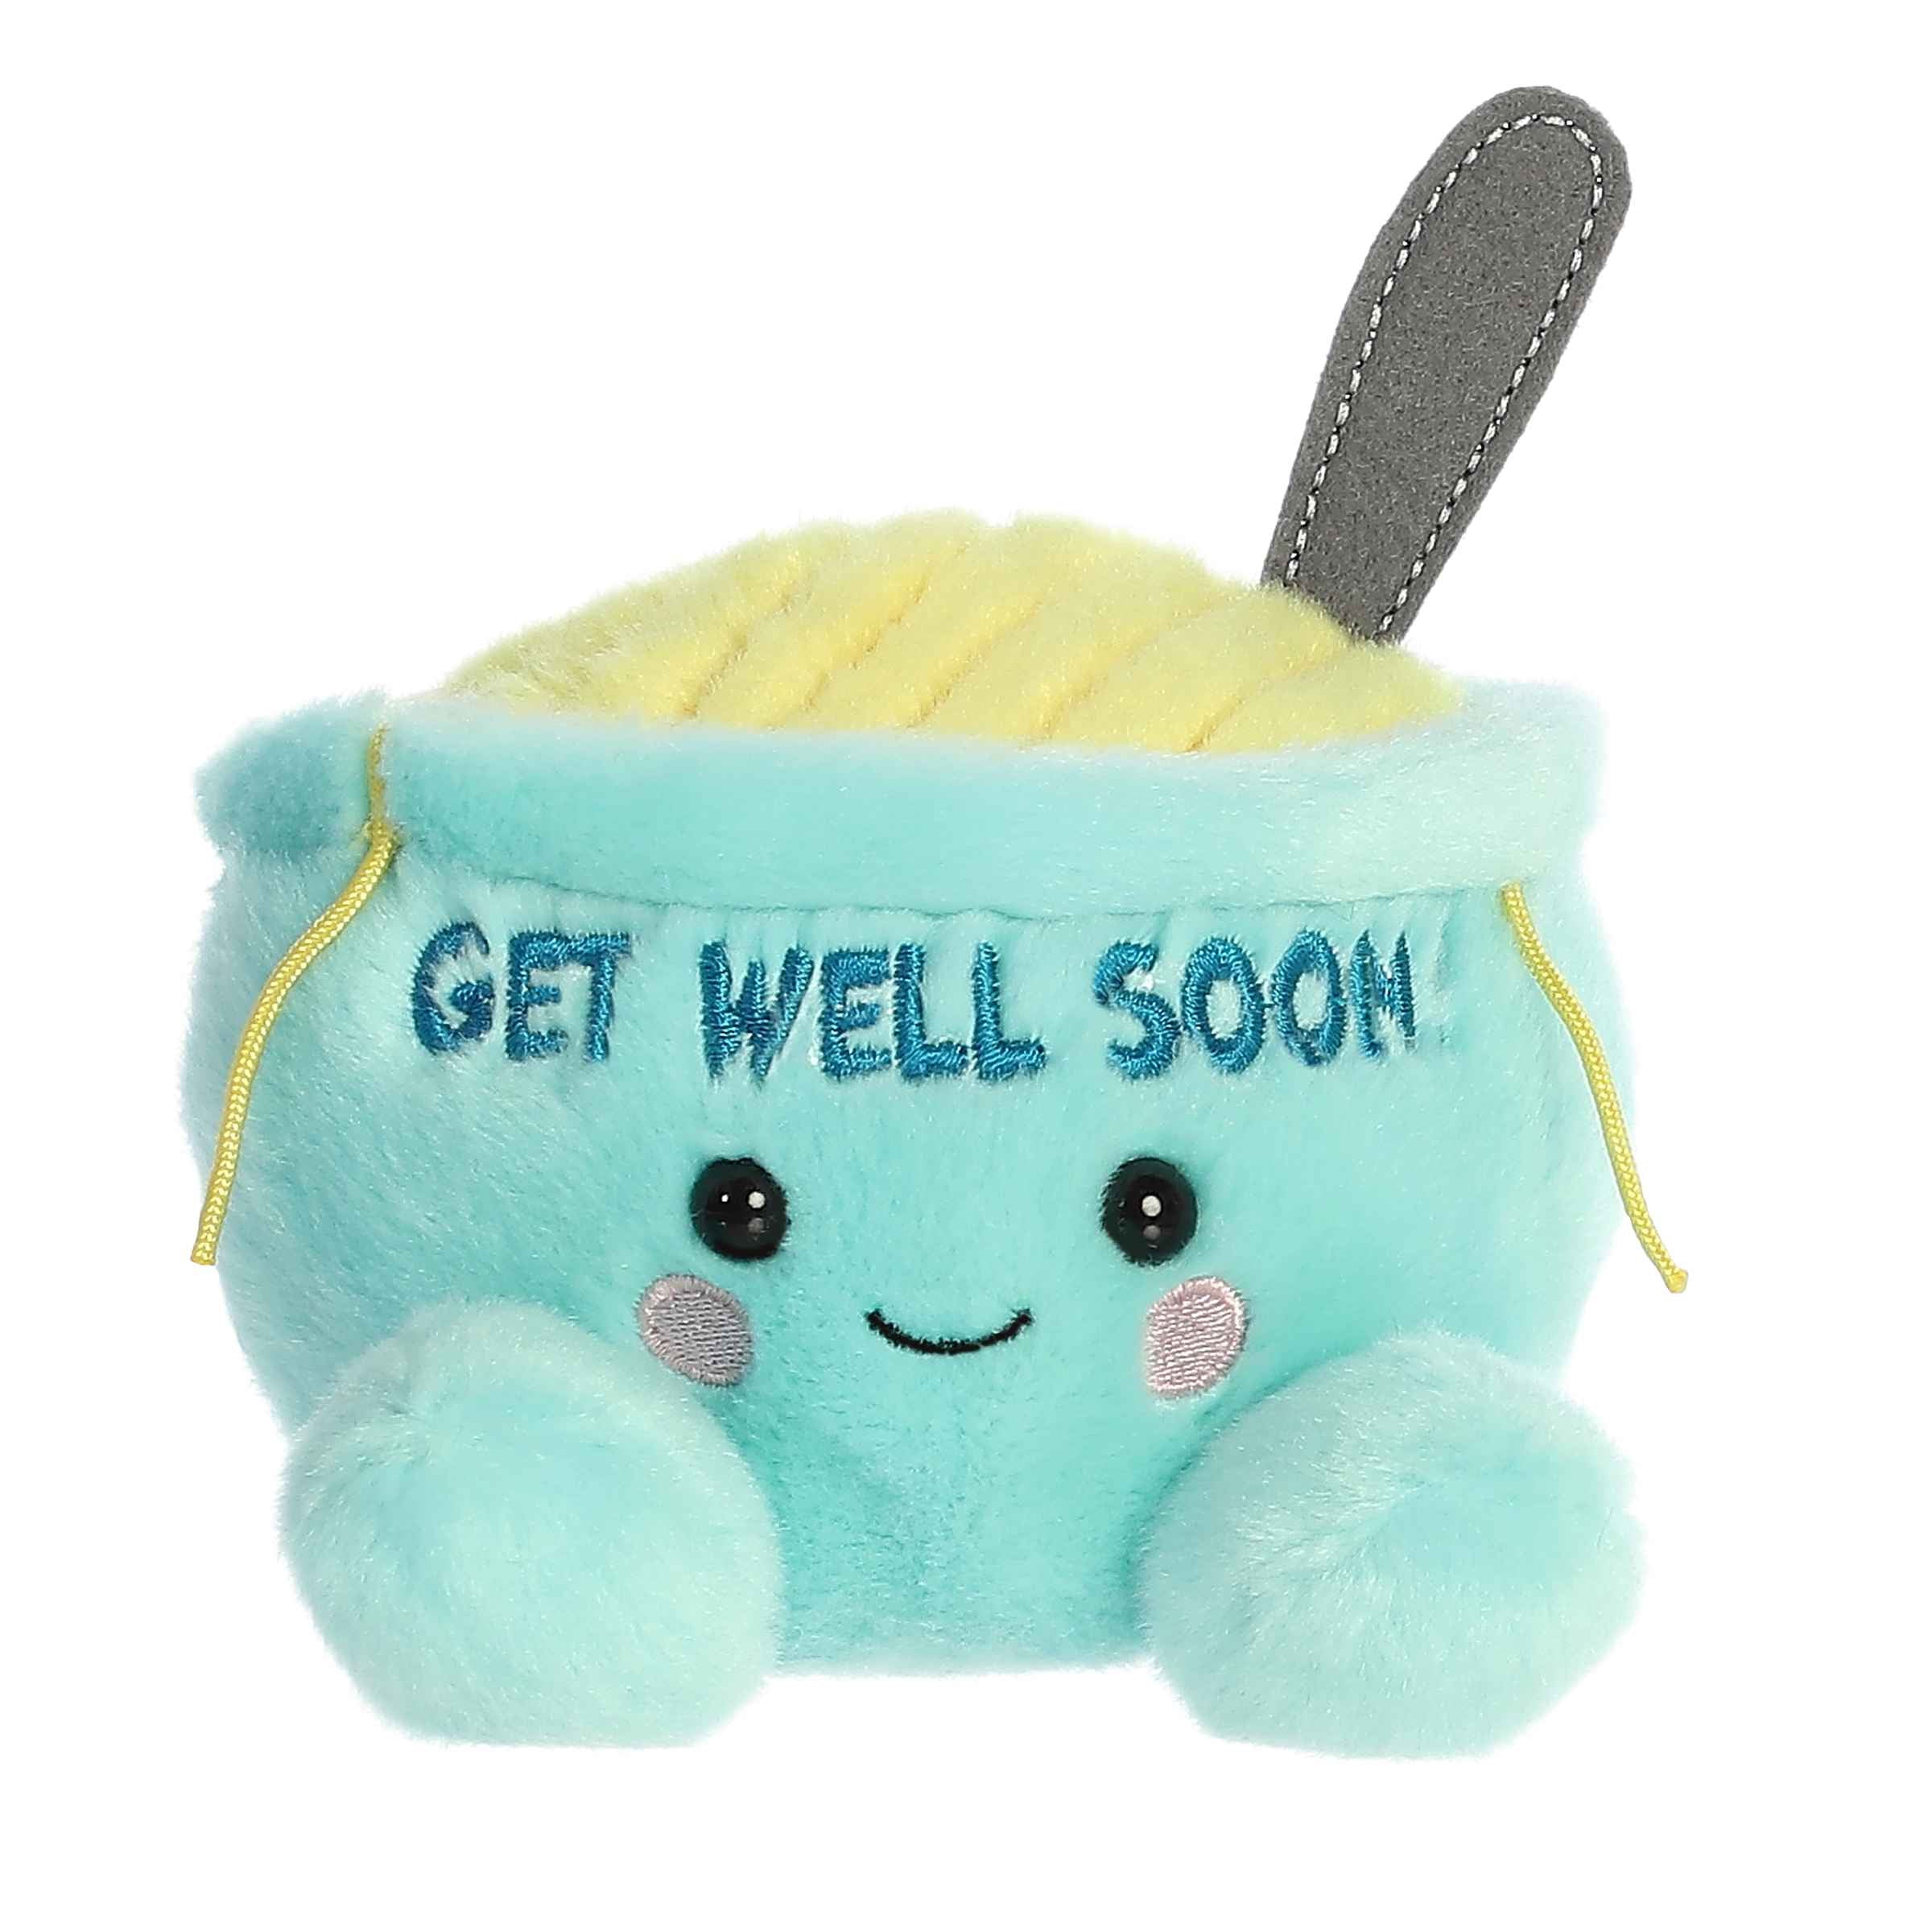 Welly Chicken Soup plush from Palm Pals, with soft yellow broth and Get Well Soon message, comforting